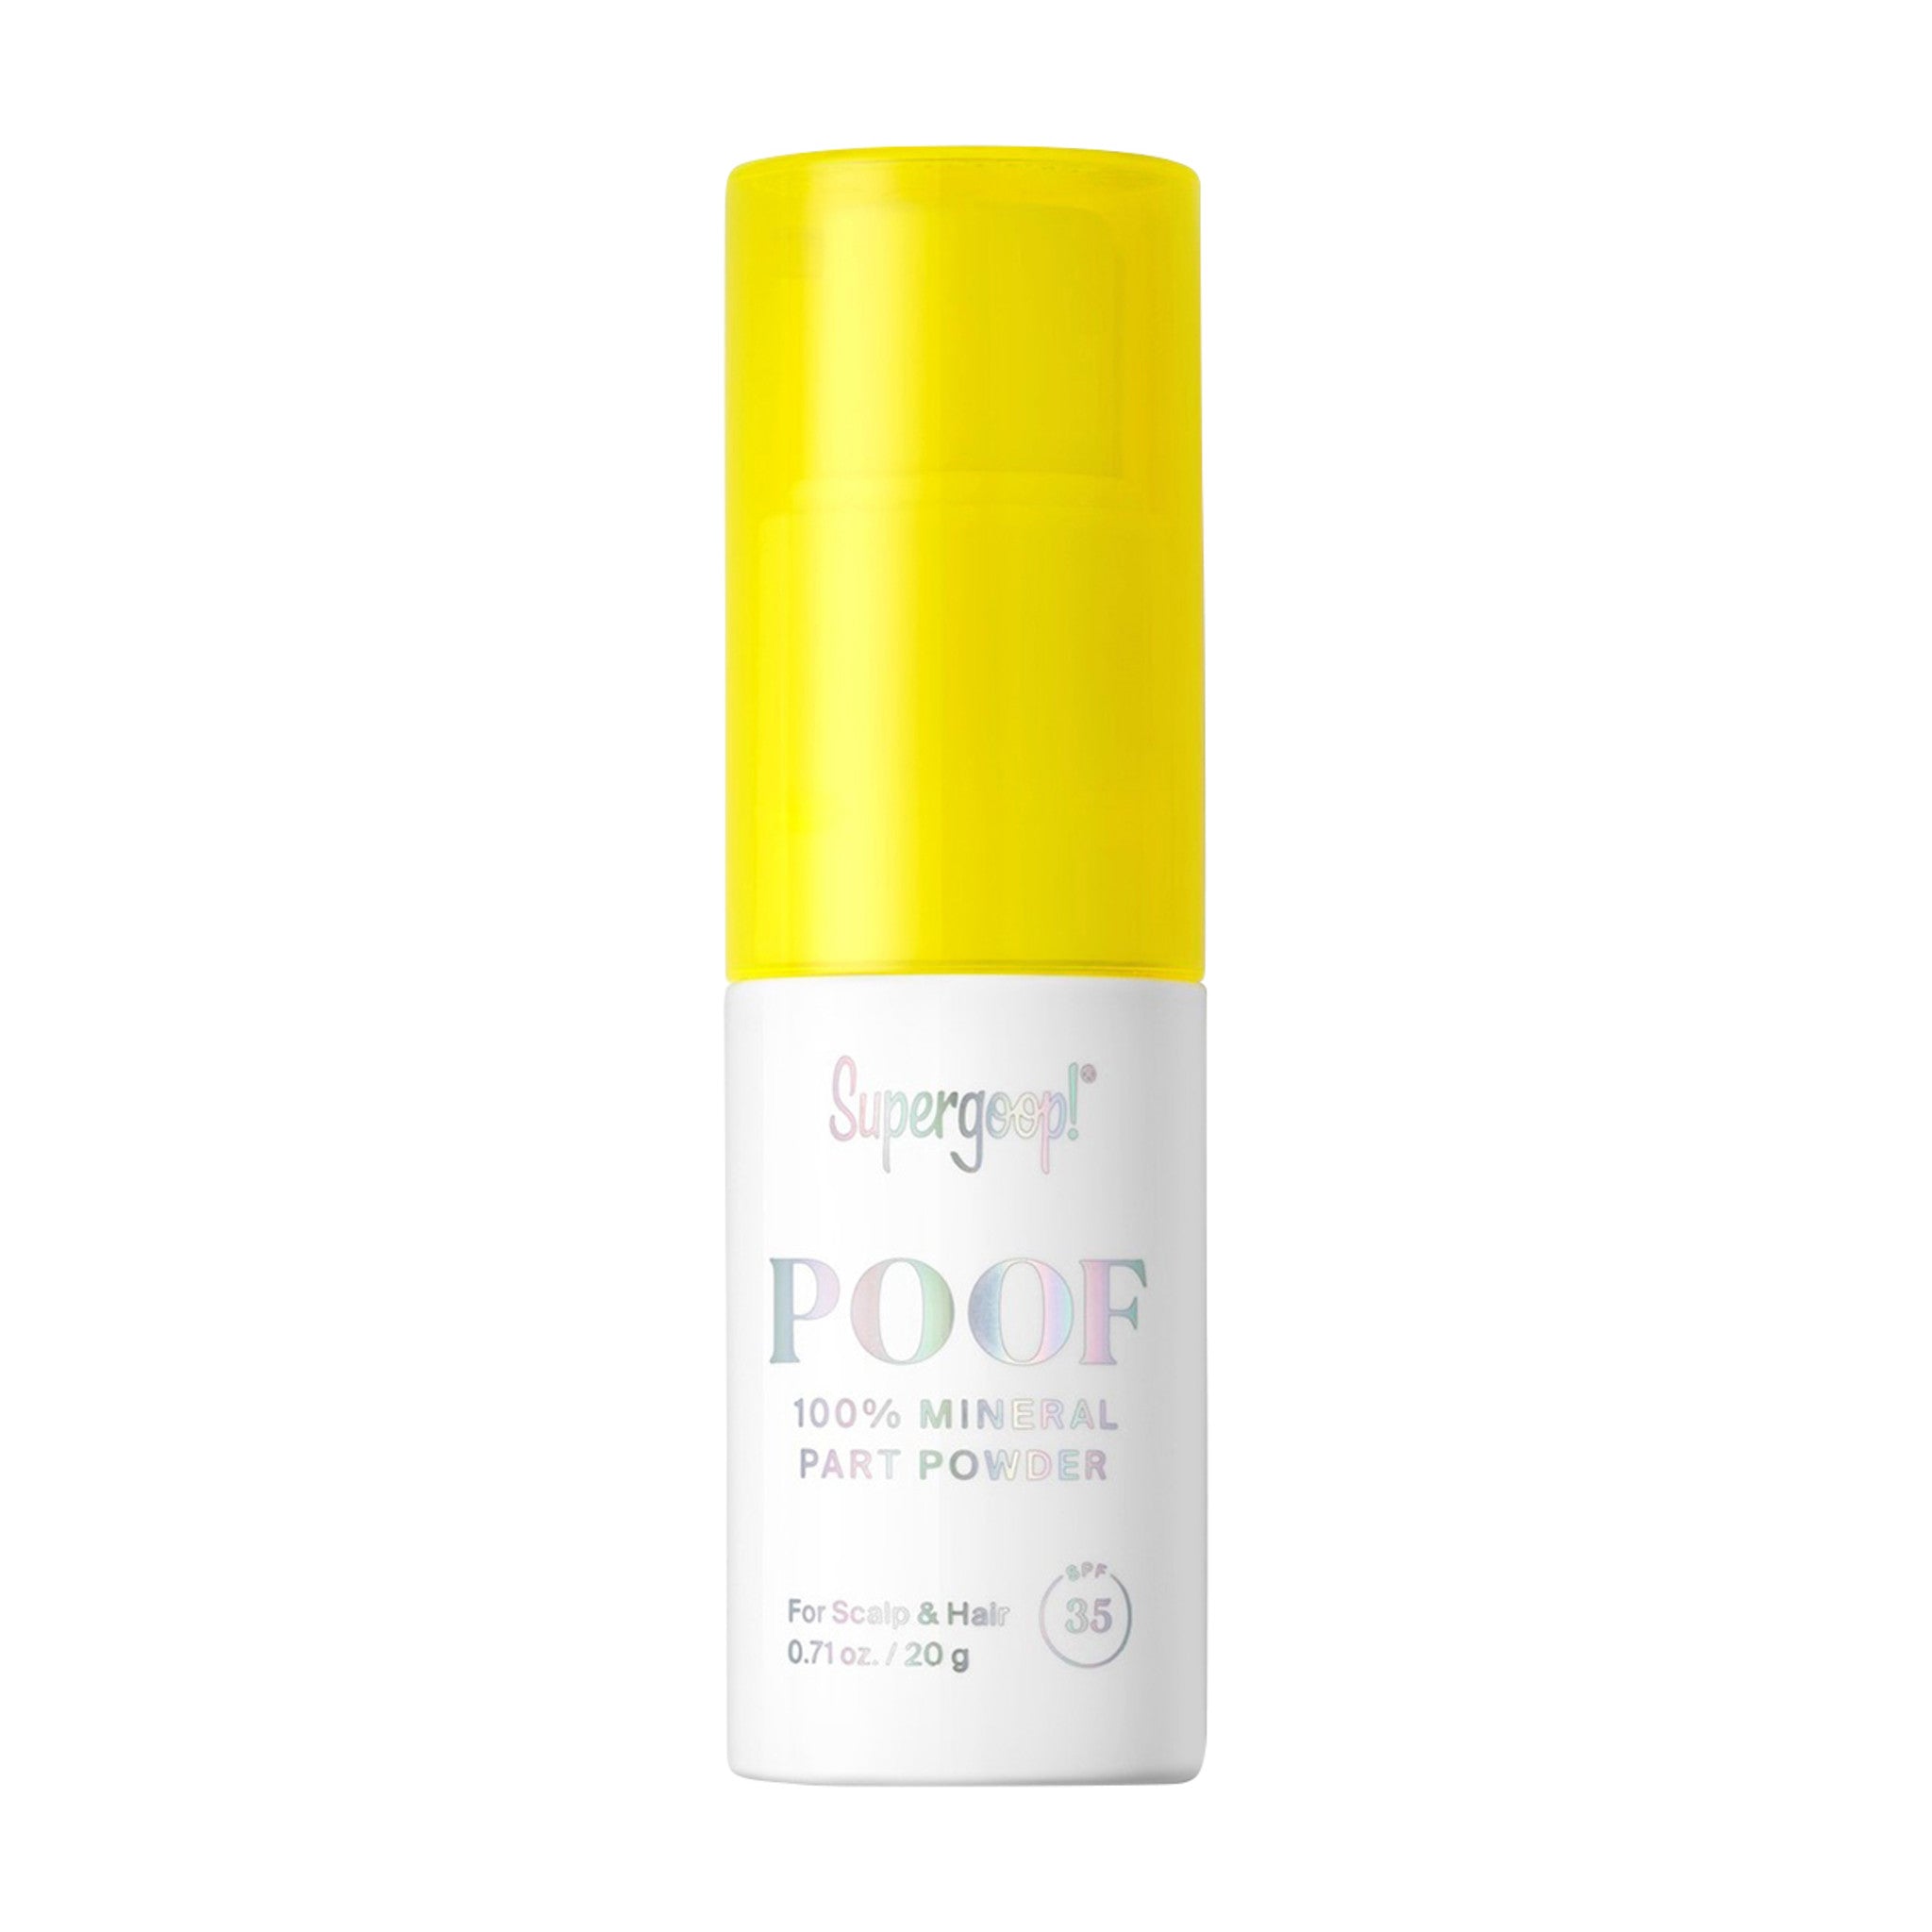 Supergoop! Poof 100% Mineral Part Powder SPF 35 main image.